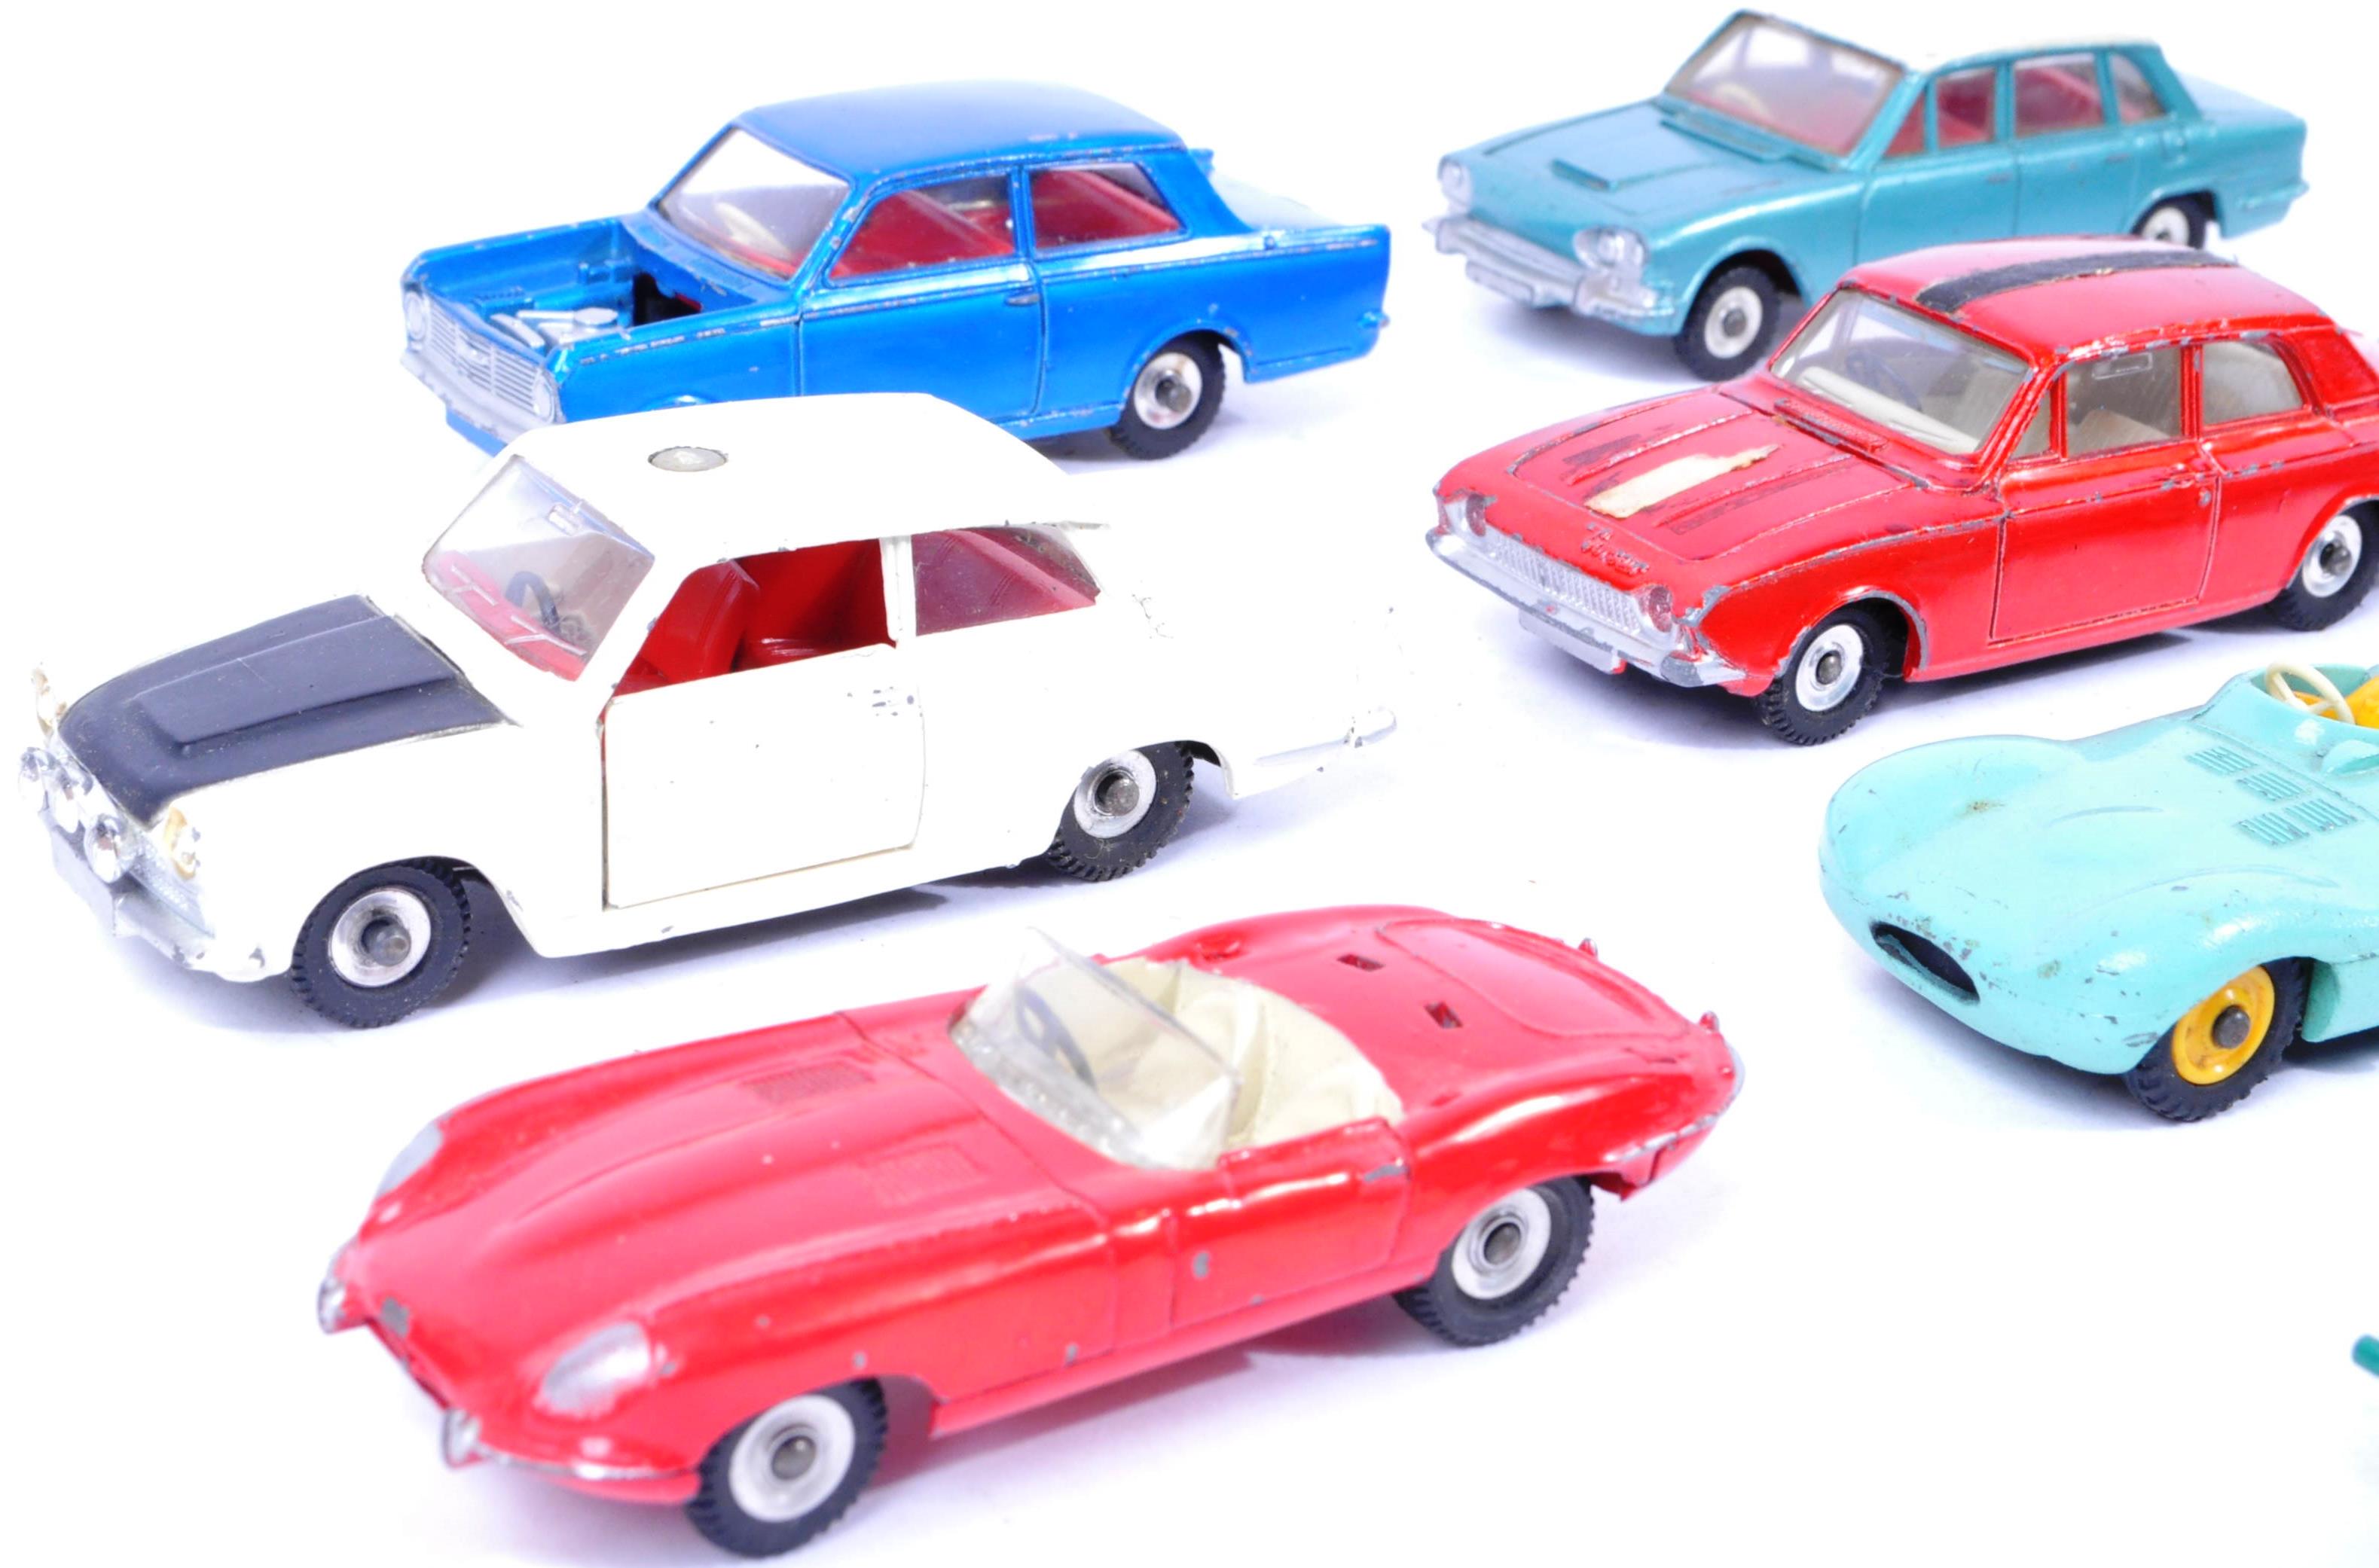 COLLECTION OF VINTAGE DINKY TOYS DIECAST MODEL CARS - Image 12 of 13